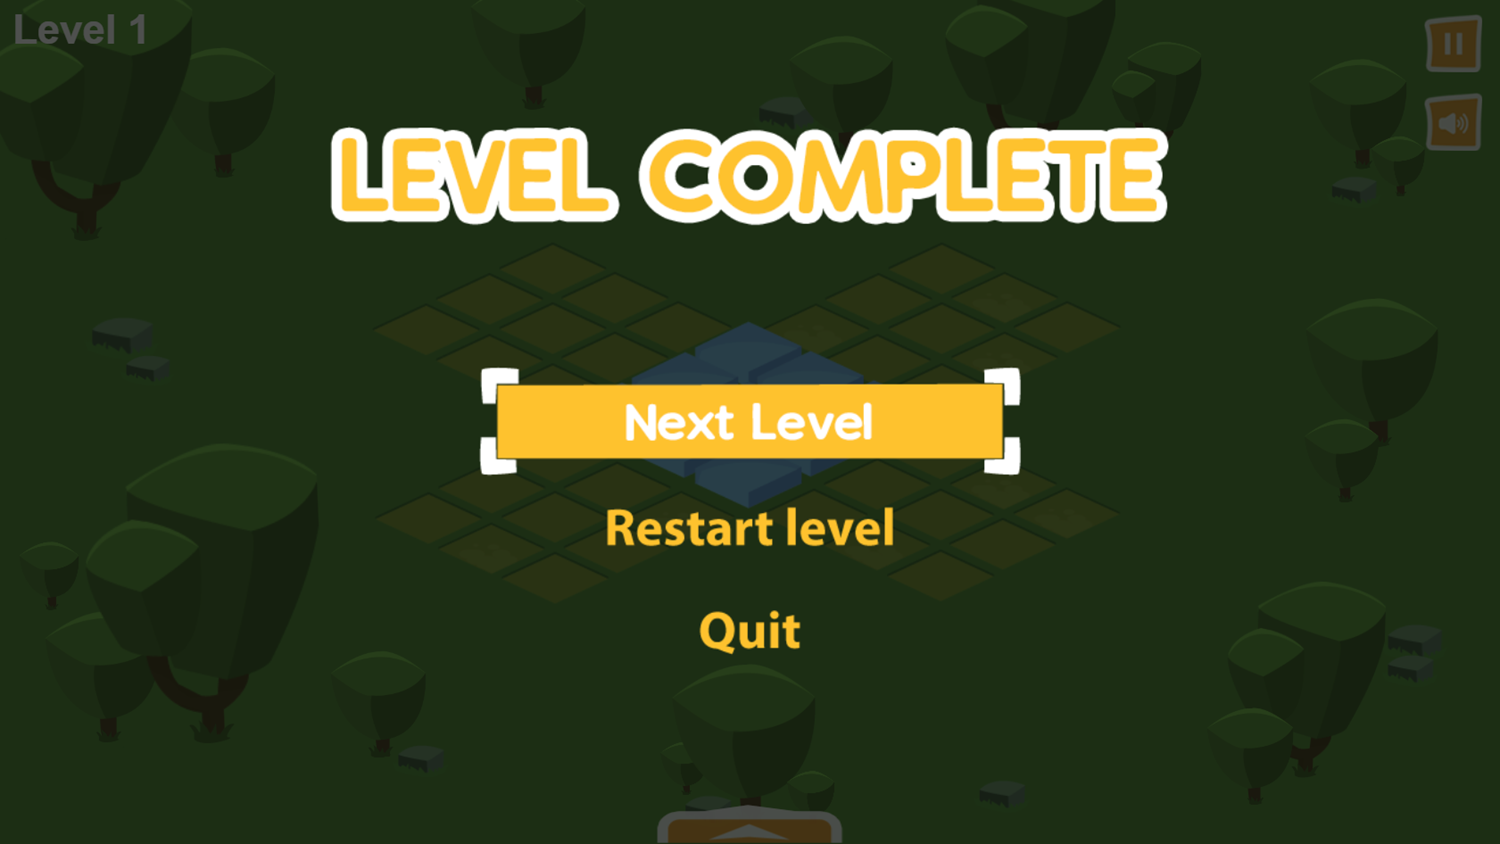 Isometric Puzzle Game Level Complete Screenshot.